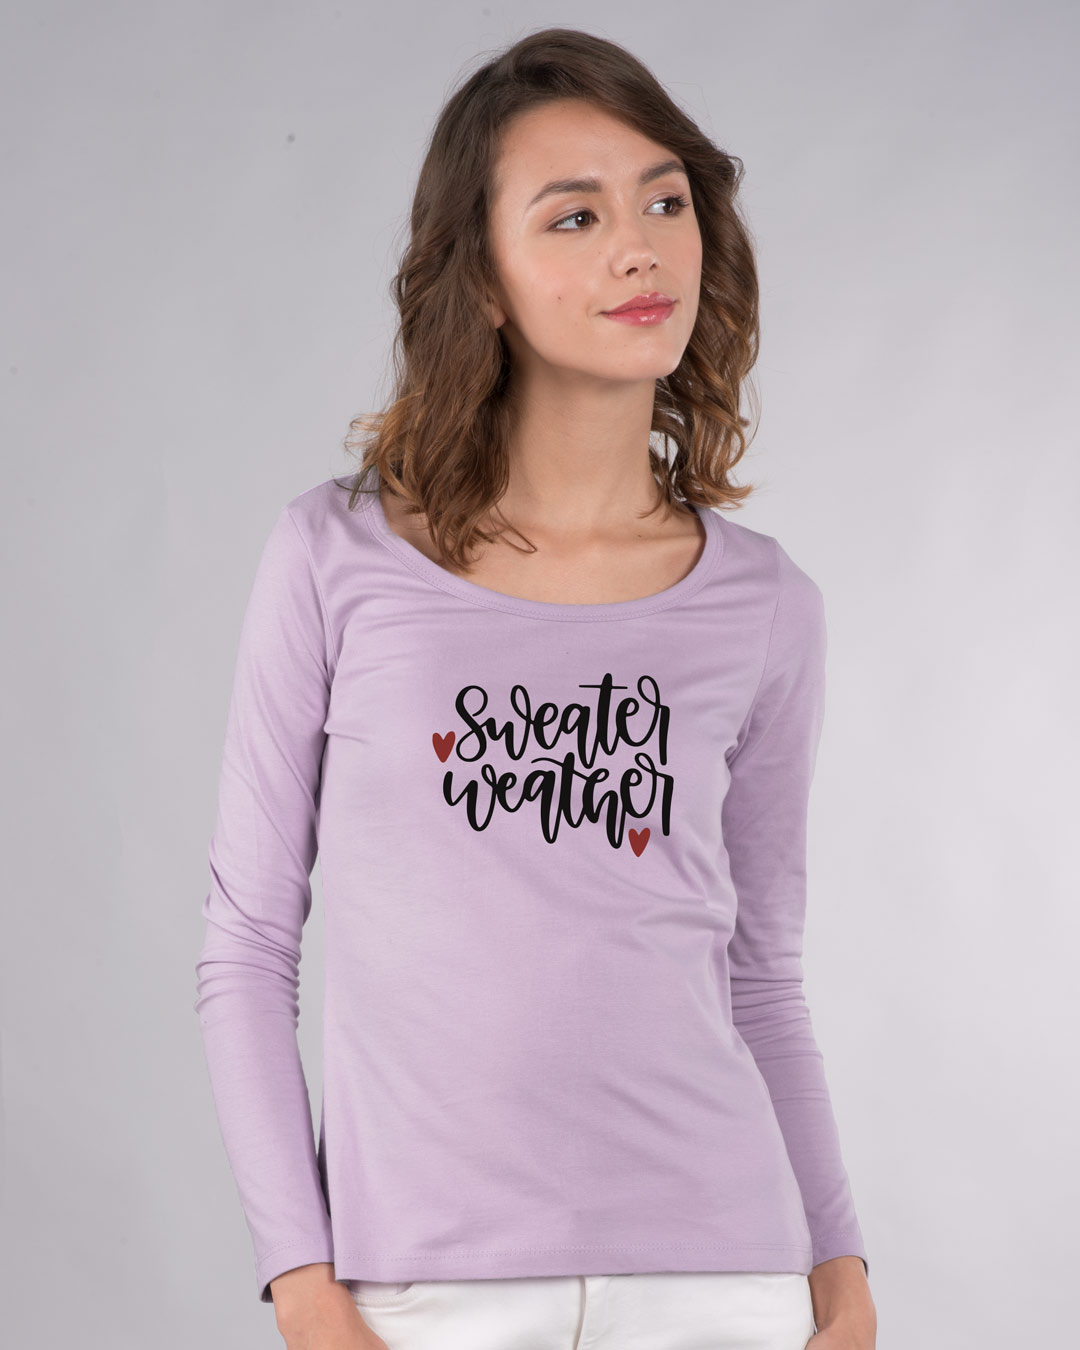 Sweater Weather Scoop Neck Full Sleeve T-Shirt